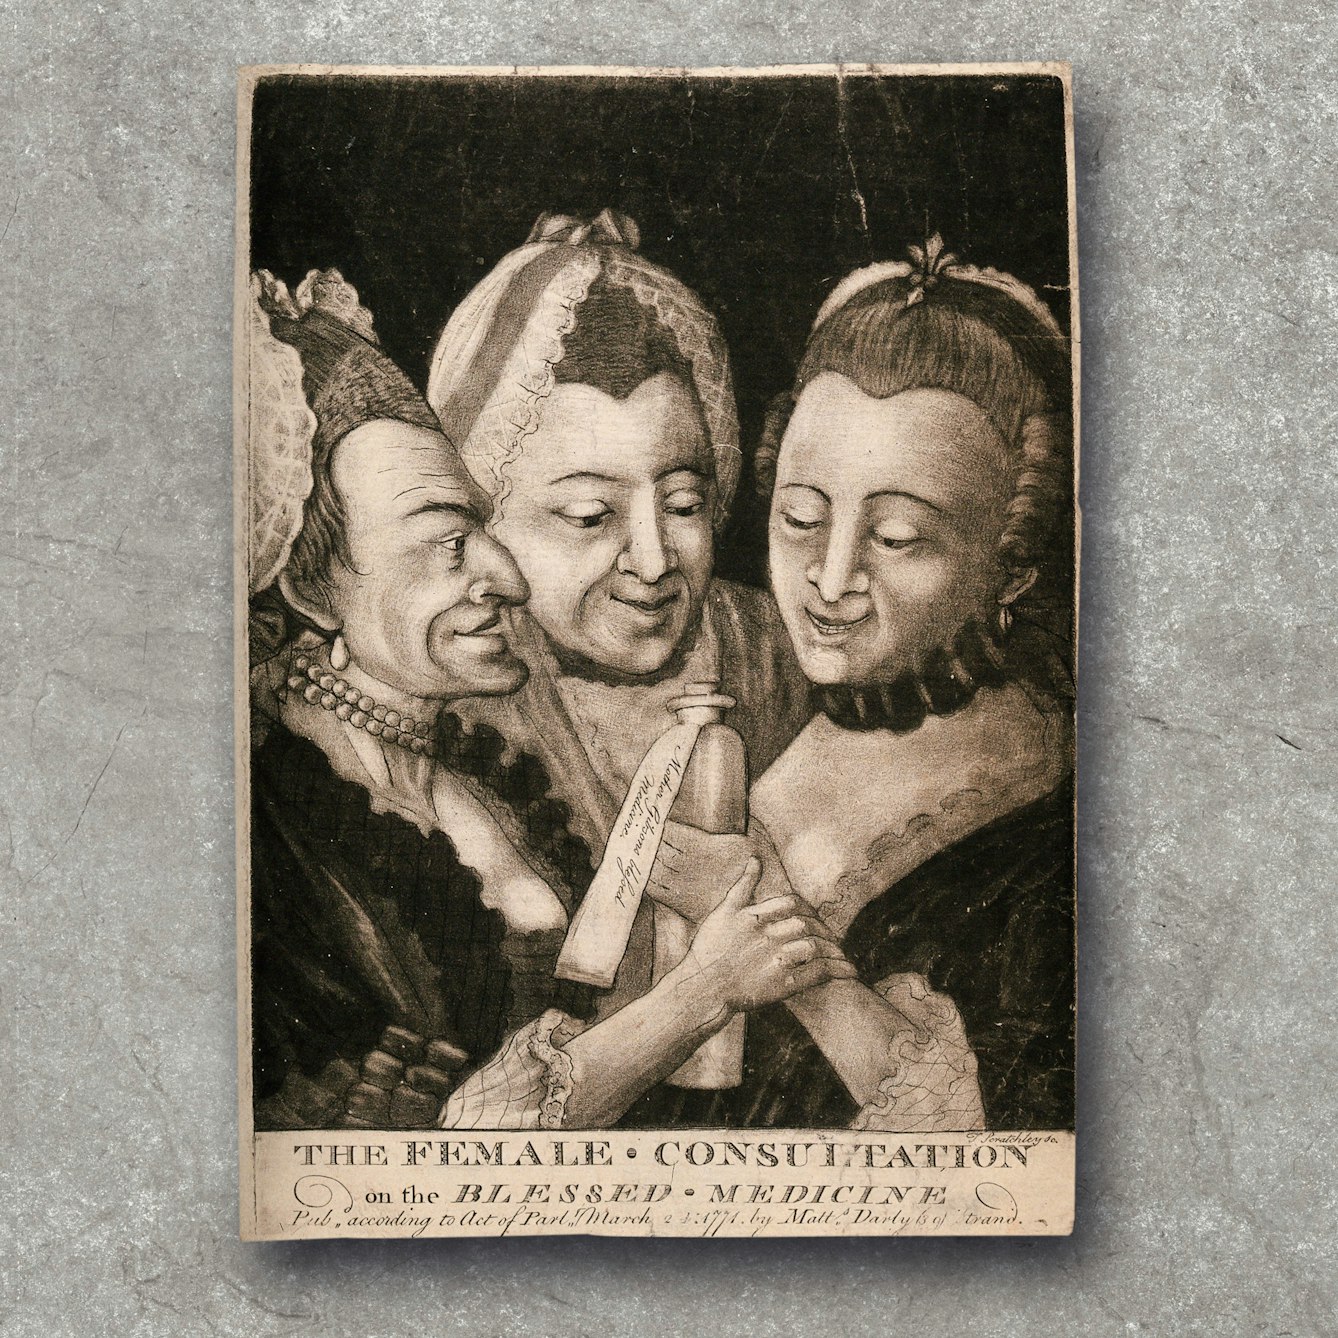 18th century Mezzotint showing three women gathered around a medicine bottle. Text along the bottom reads 'The Female Consultation on the Blessed Medicine'. 